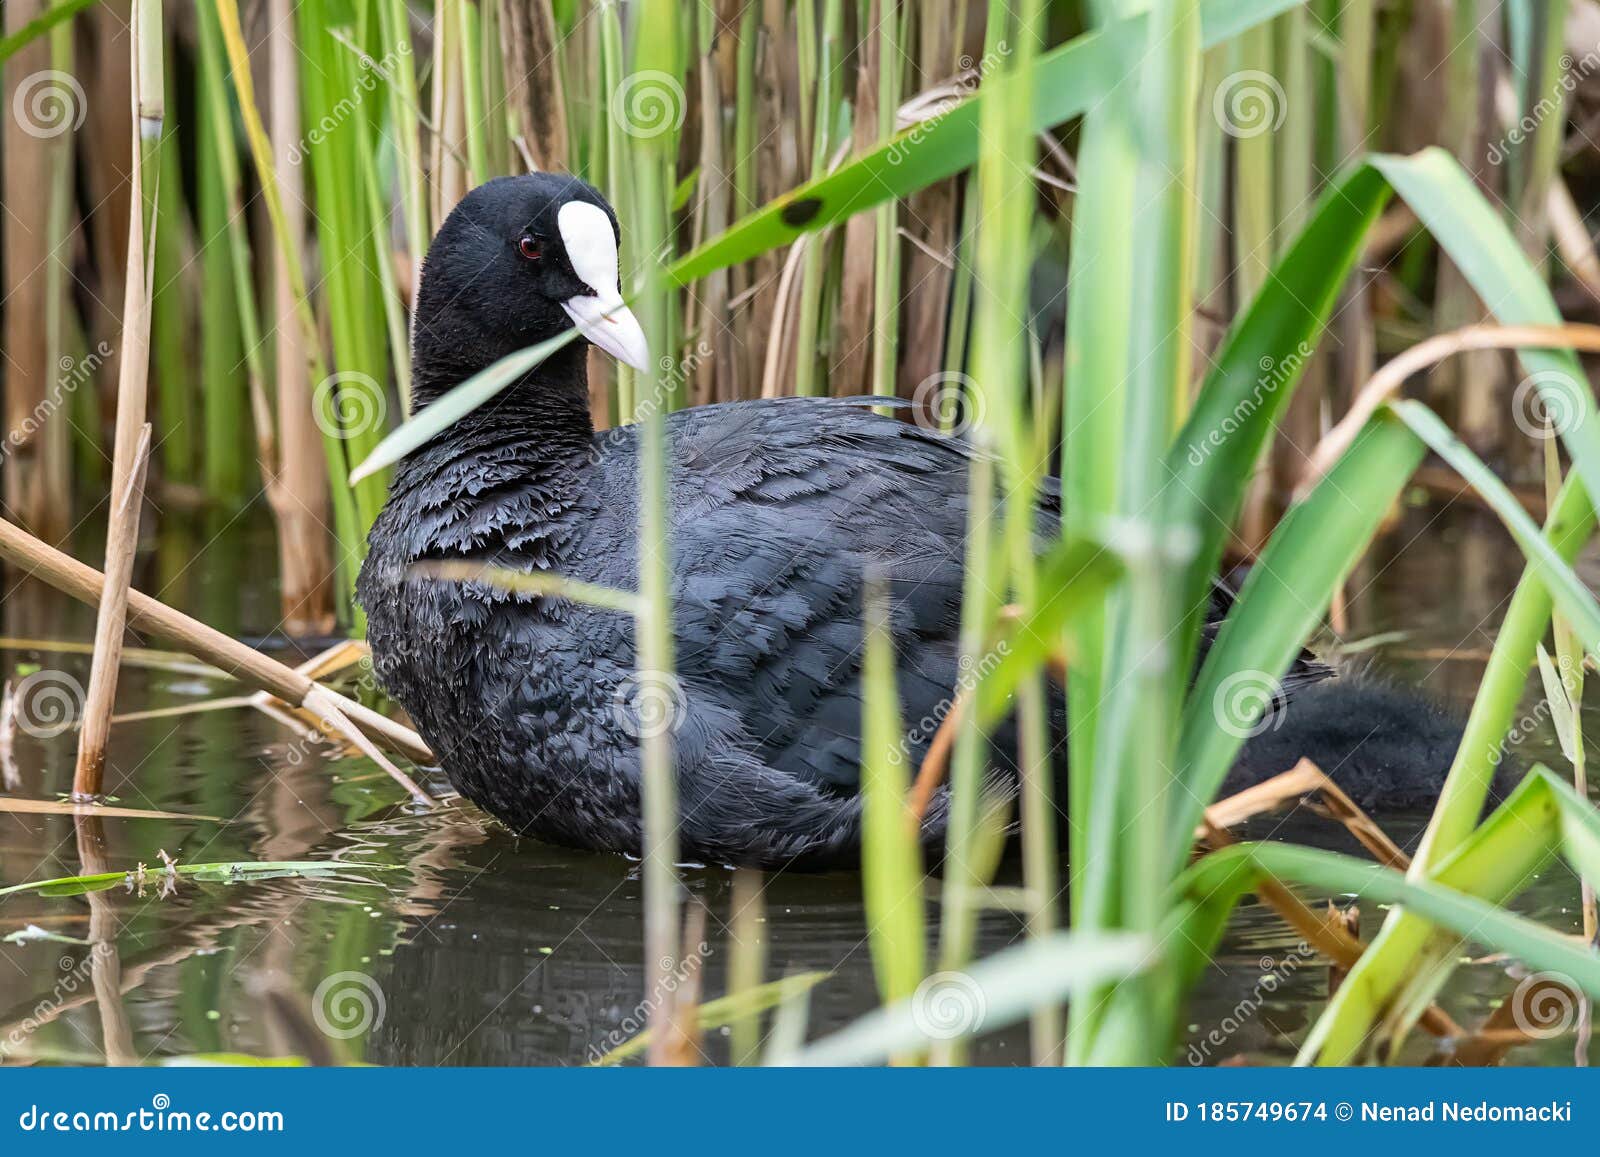 januar lære sejle The Eurasian Coot Fulica Atra, Also Known As the Common Coot, or Australian  Coot, is a Member of the Rail and Crake Bird Family, Stock Photo - Image of  gruiformes, close: 185749674